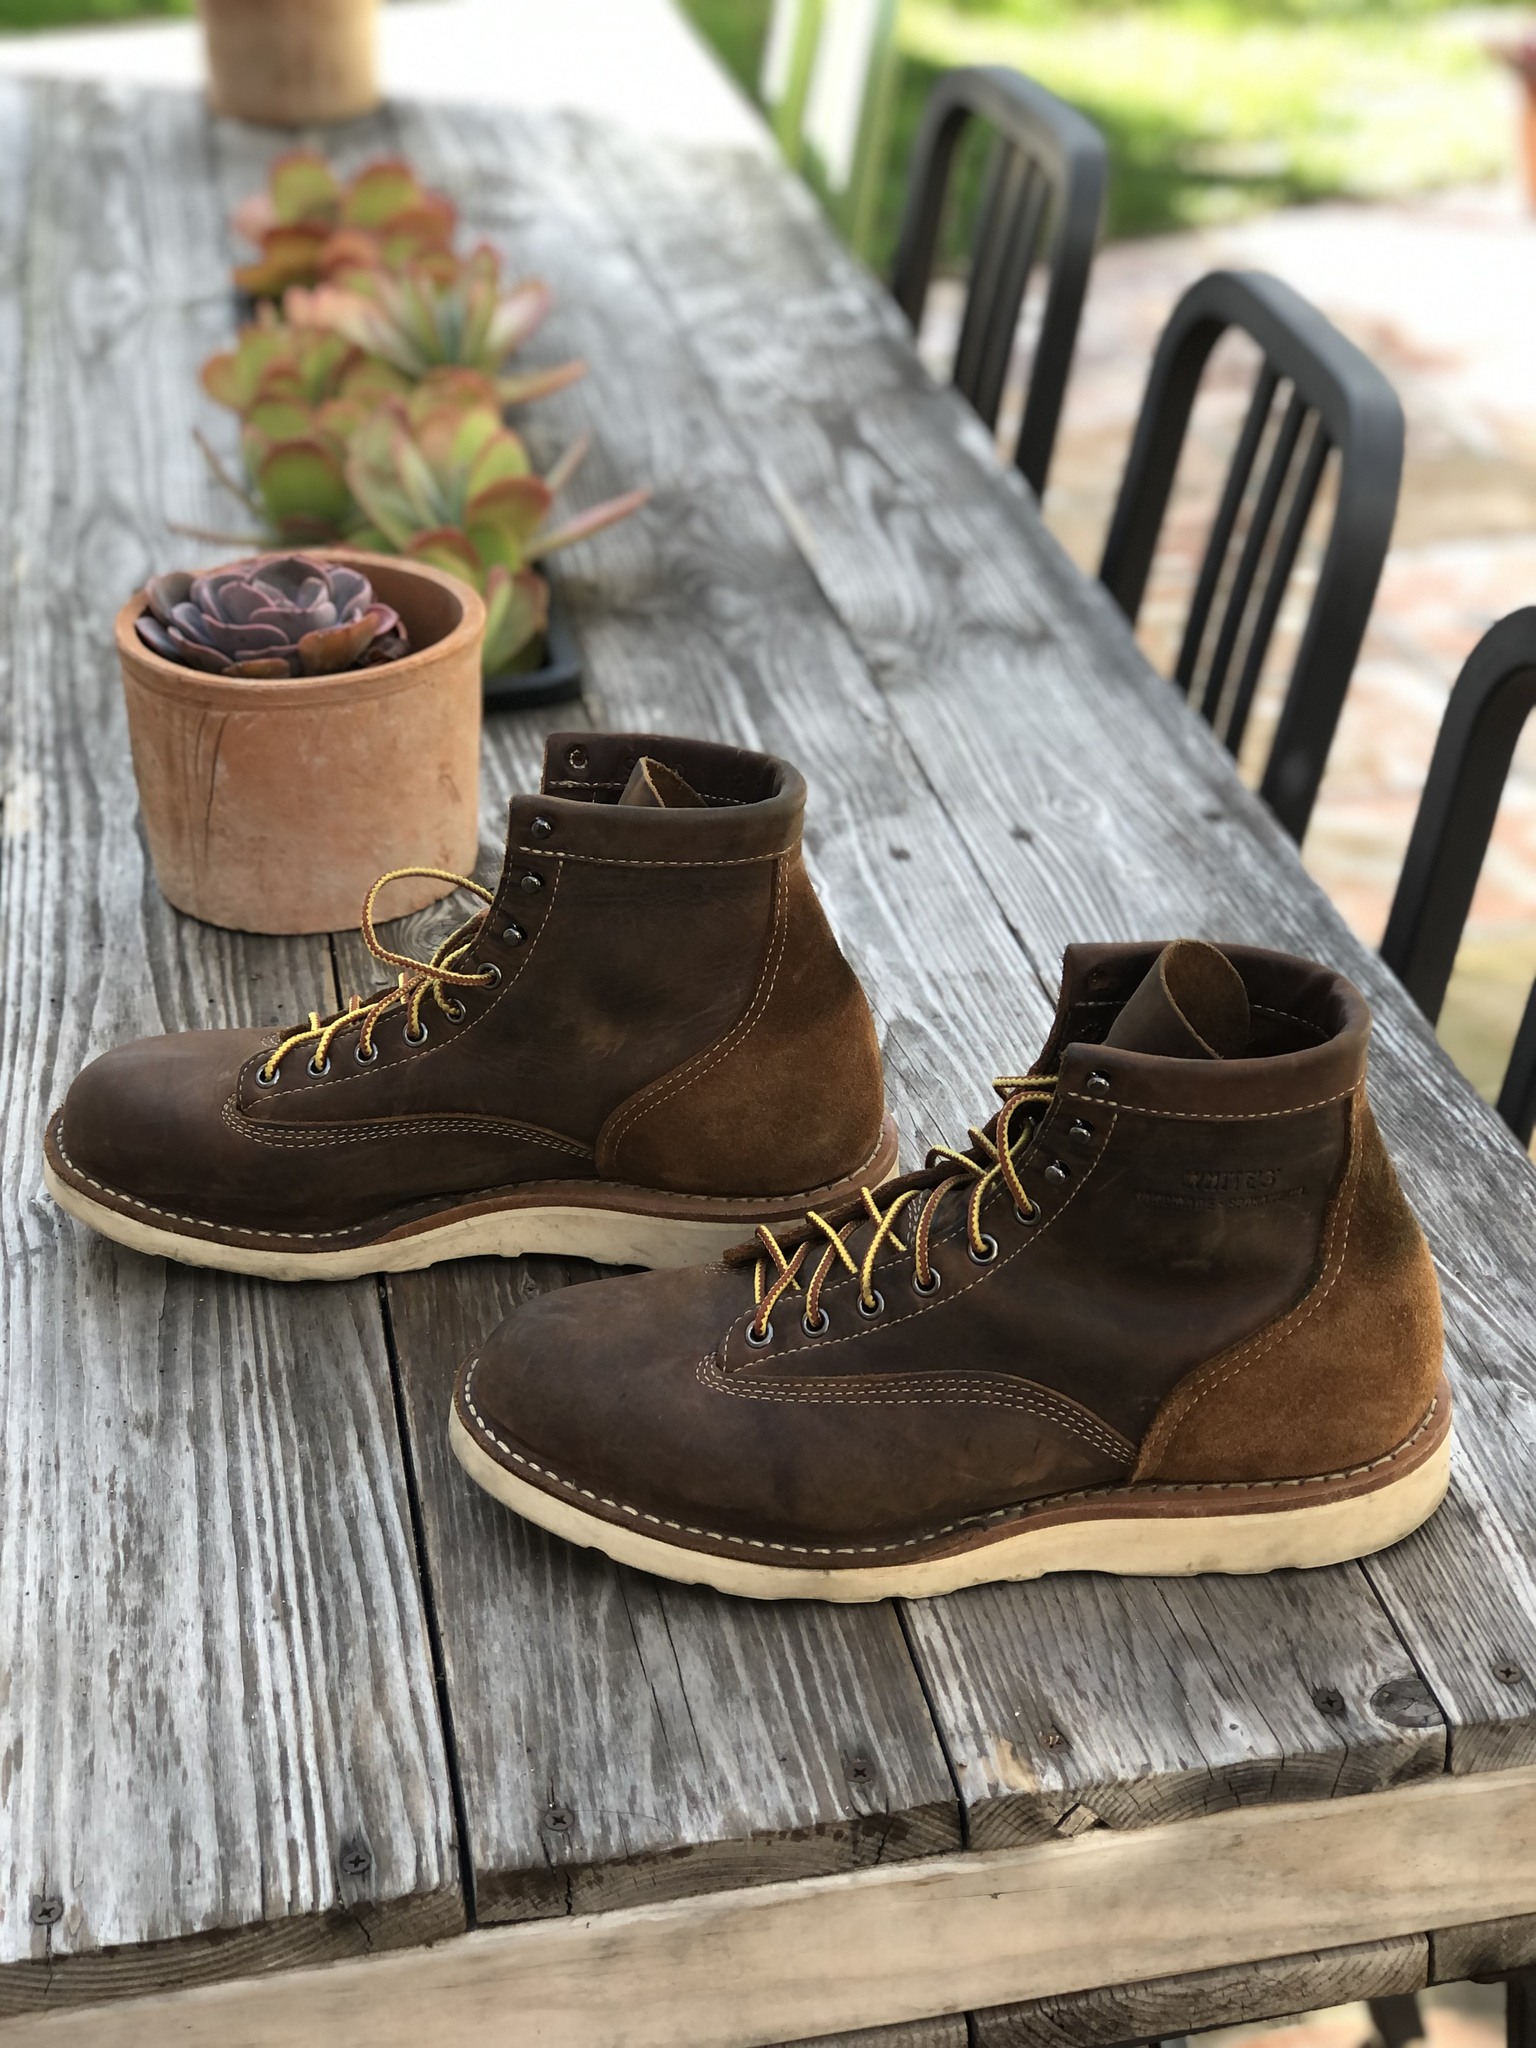 Huckberry x White\'s Boots Foreman LTT For Sale 9.5 D | The Fedora Lounge